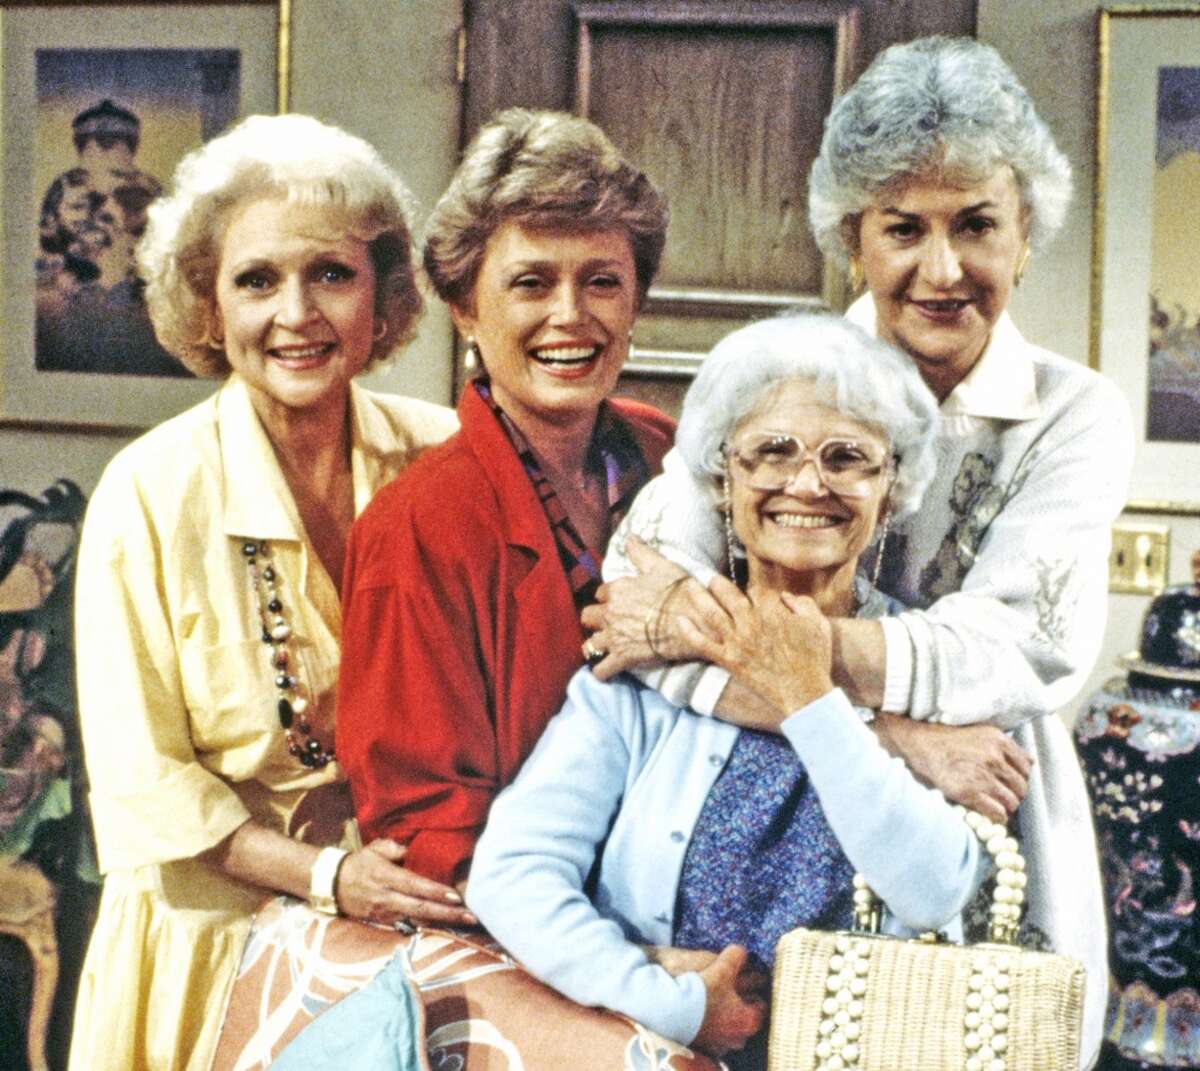 Golden Girls "The older you get, the better you get. Unless you're a banana." -- Rose